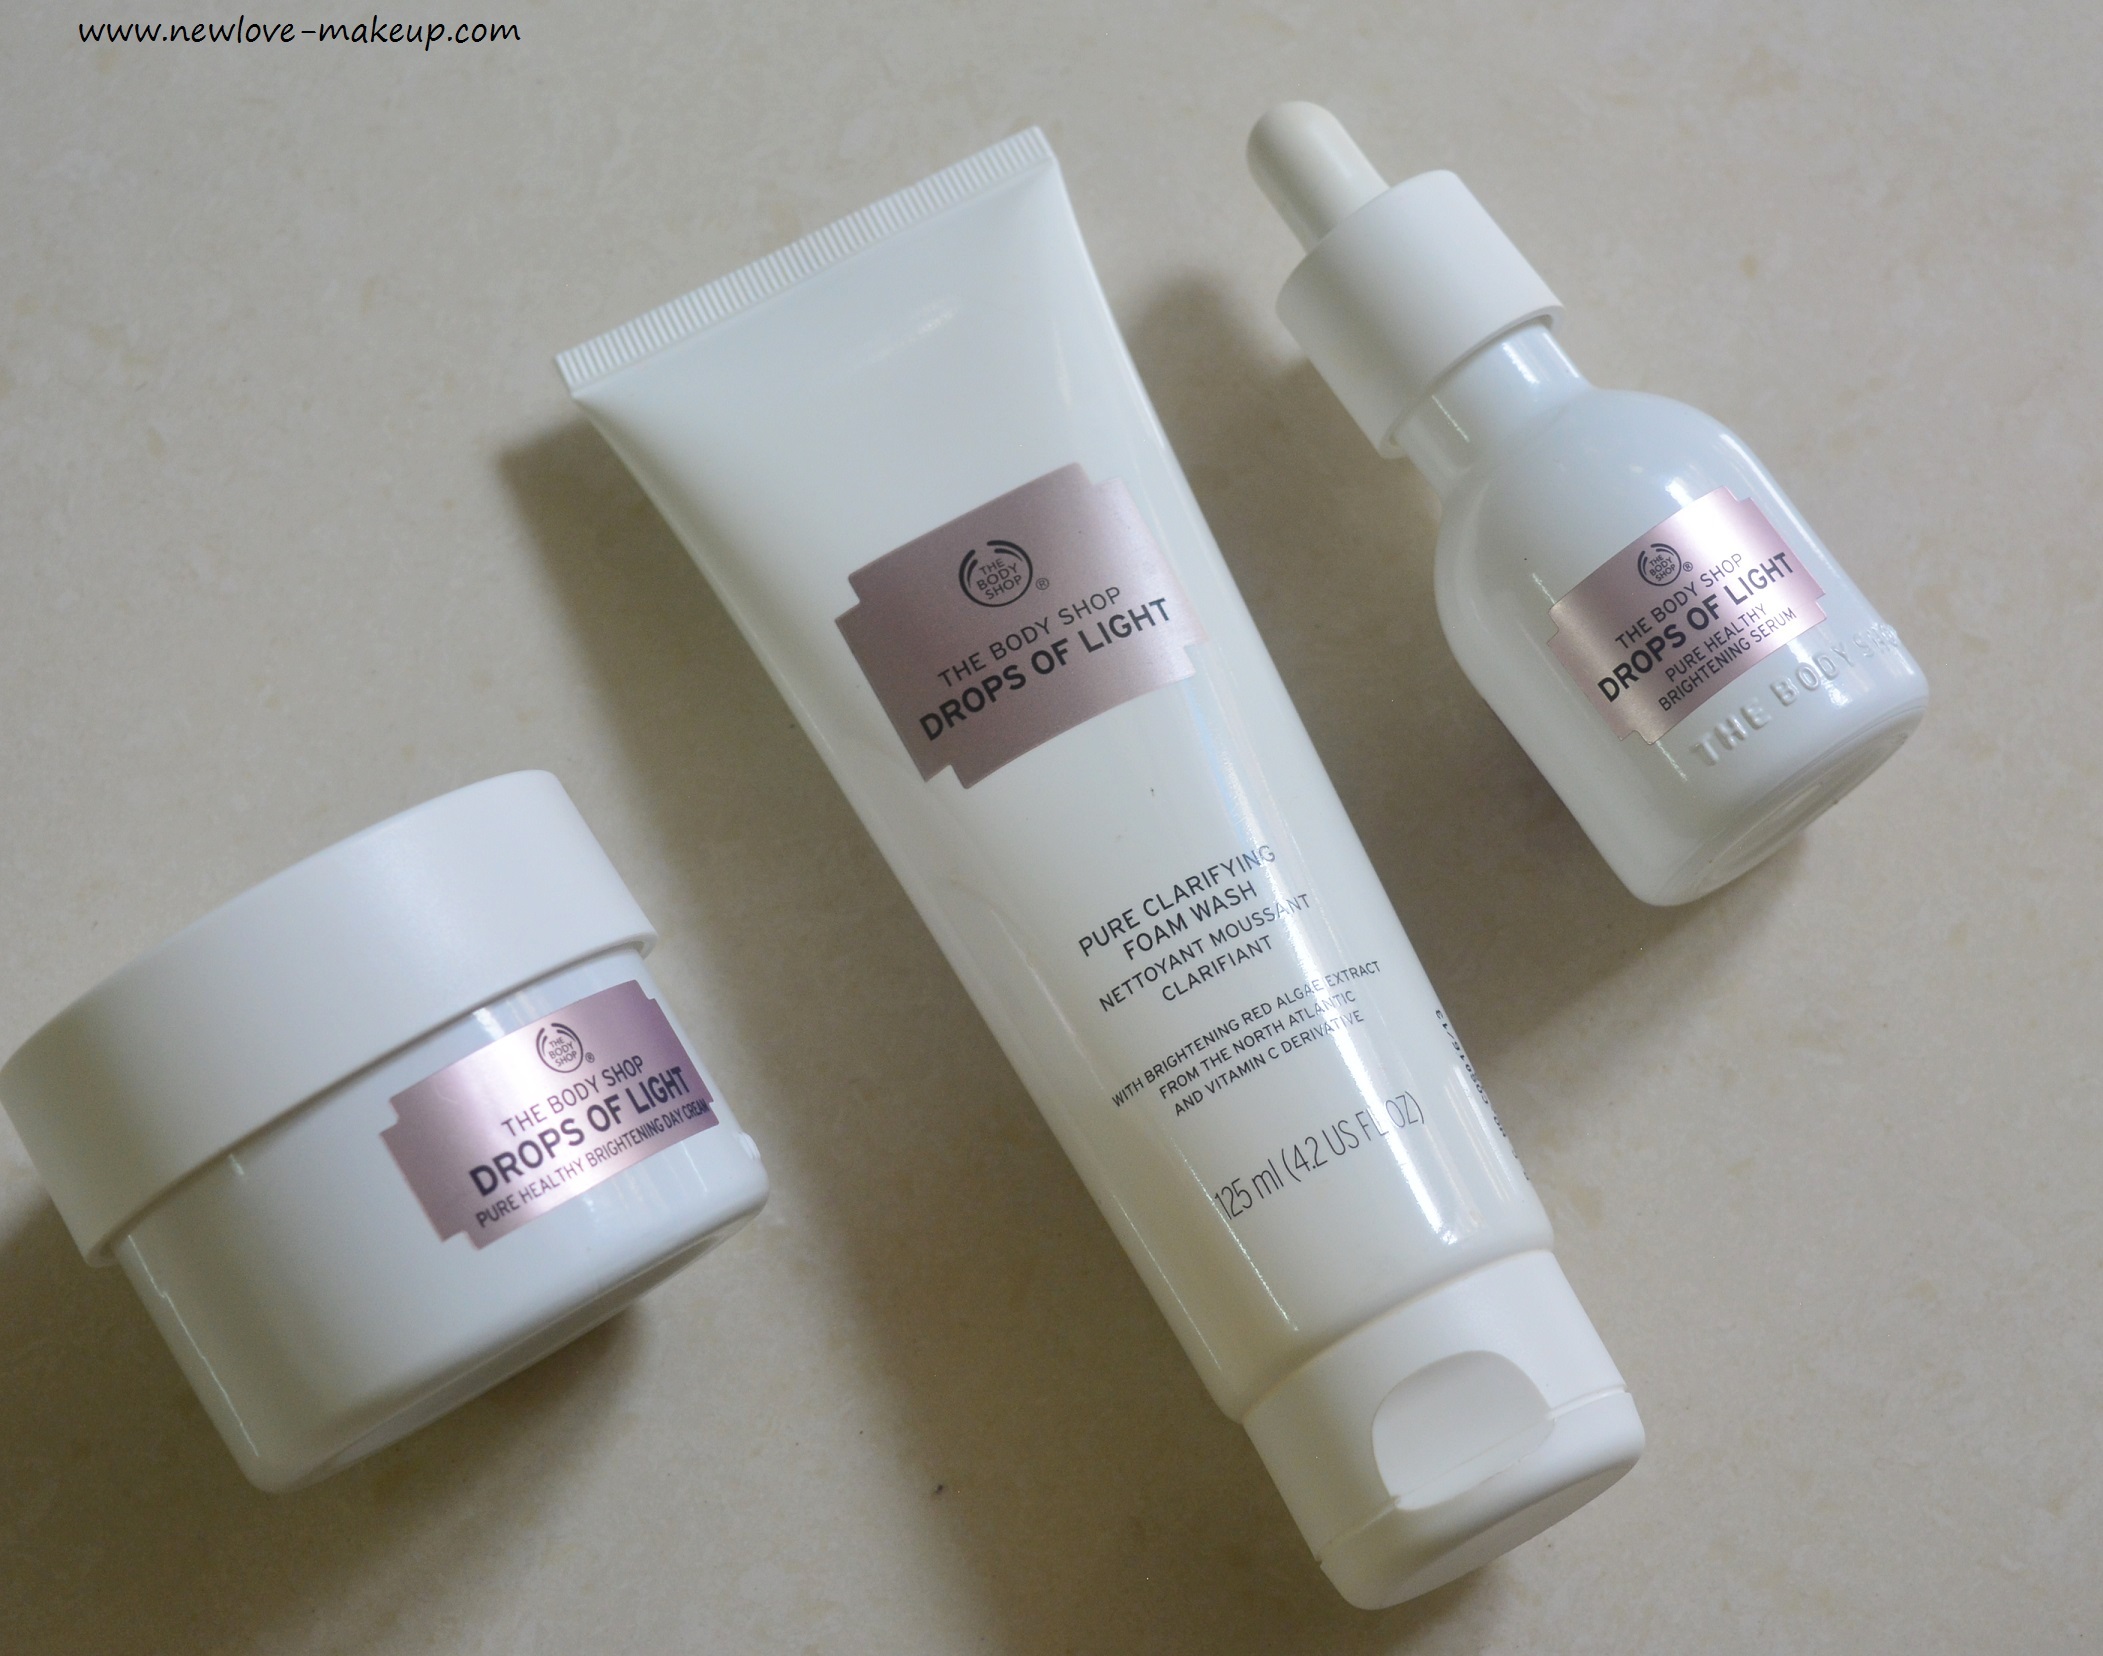 The Body Shop Drops of Light Review - New Love - Makeup